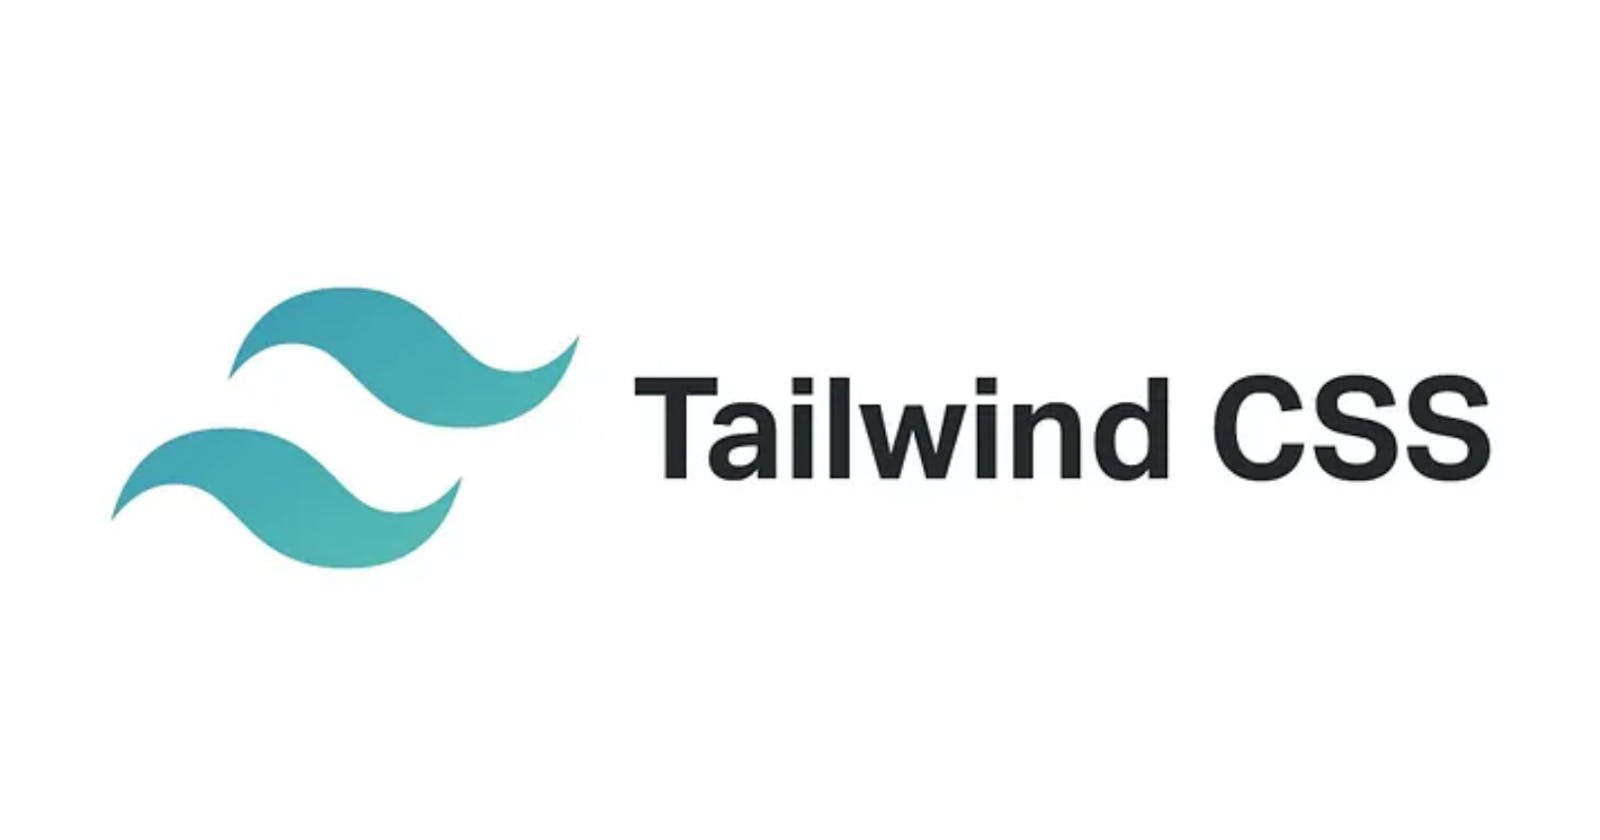 Tailwind intro – good and bad